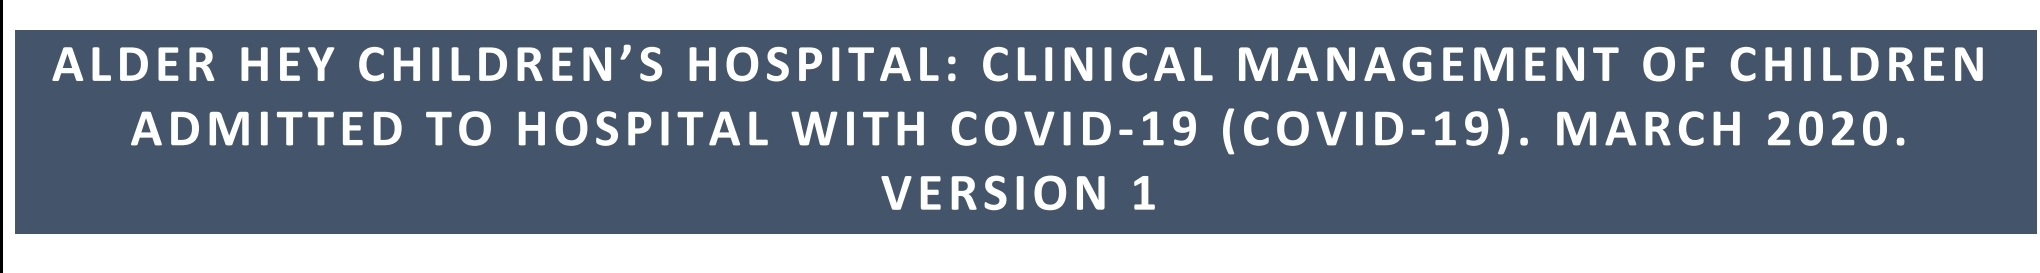 Guidance for the clinical management of children admitted to  hospital with proven COVID-19